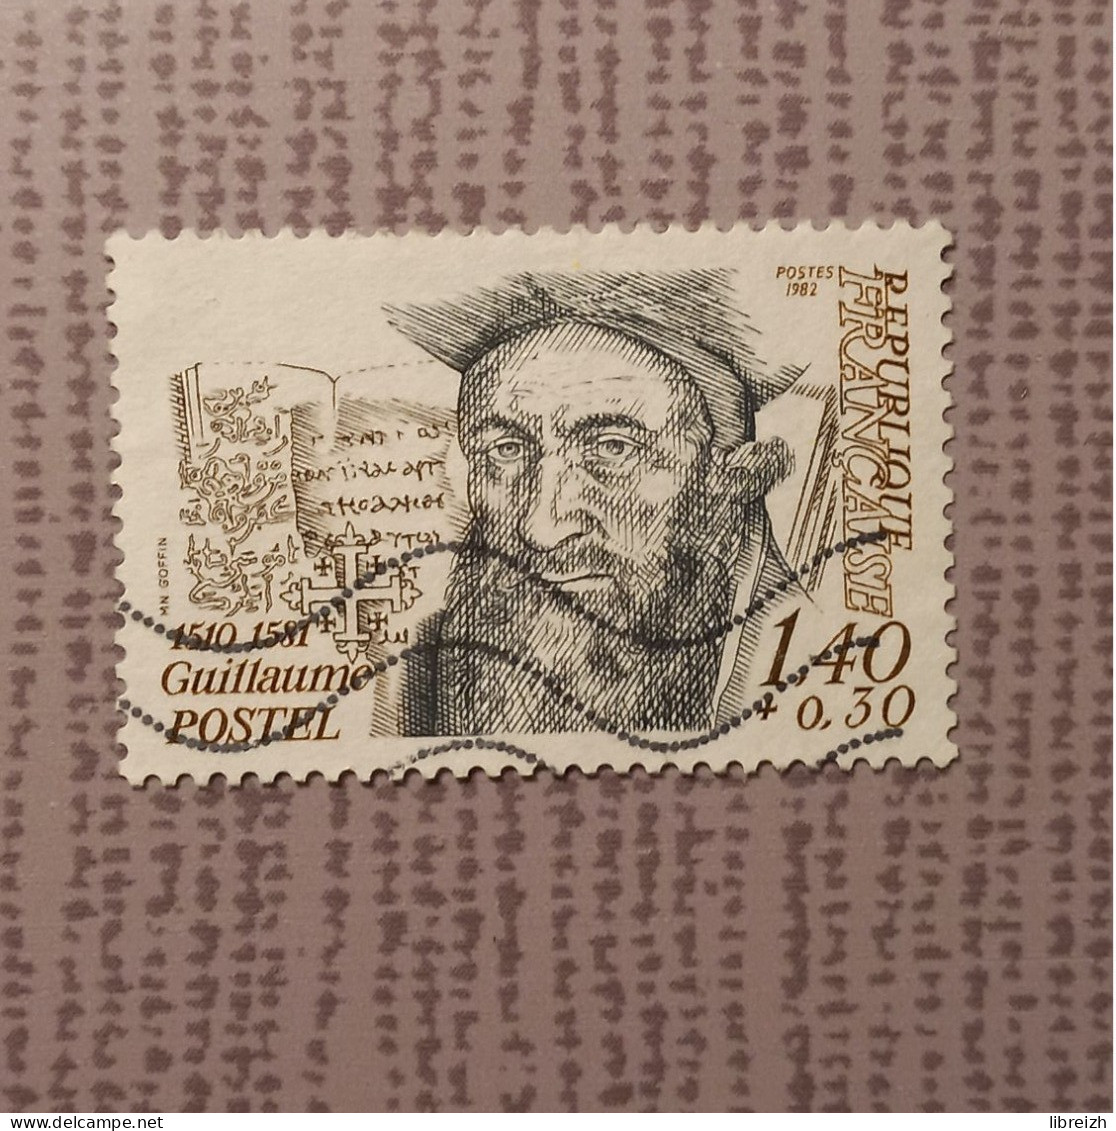 Guillaume Postel  N° 2225  Année 1982 - Used Stamps